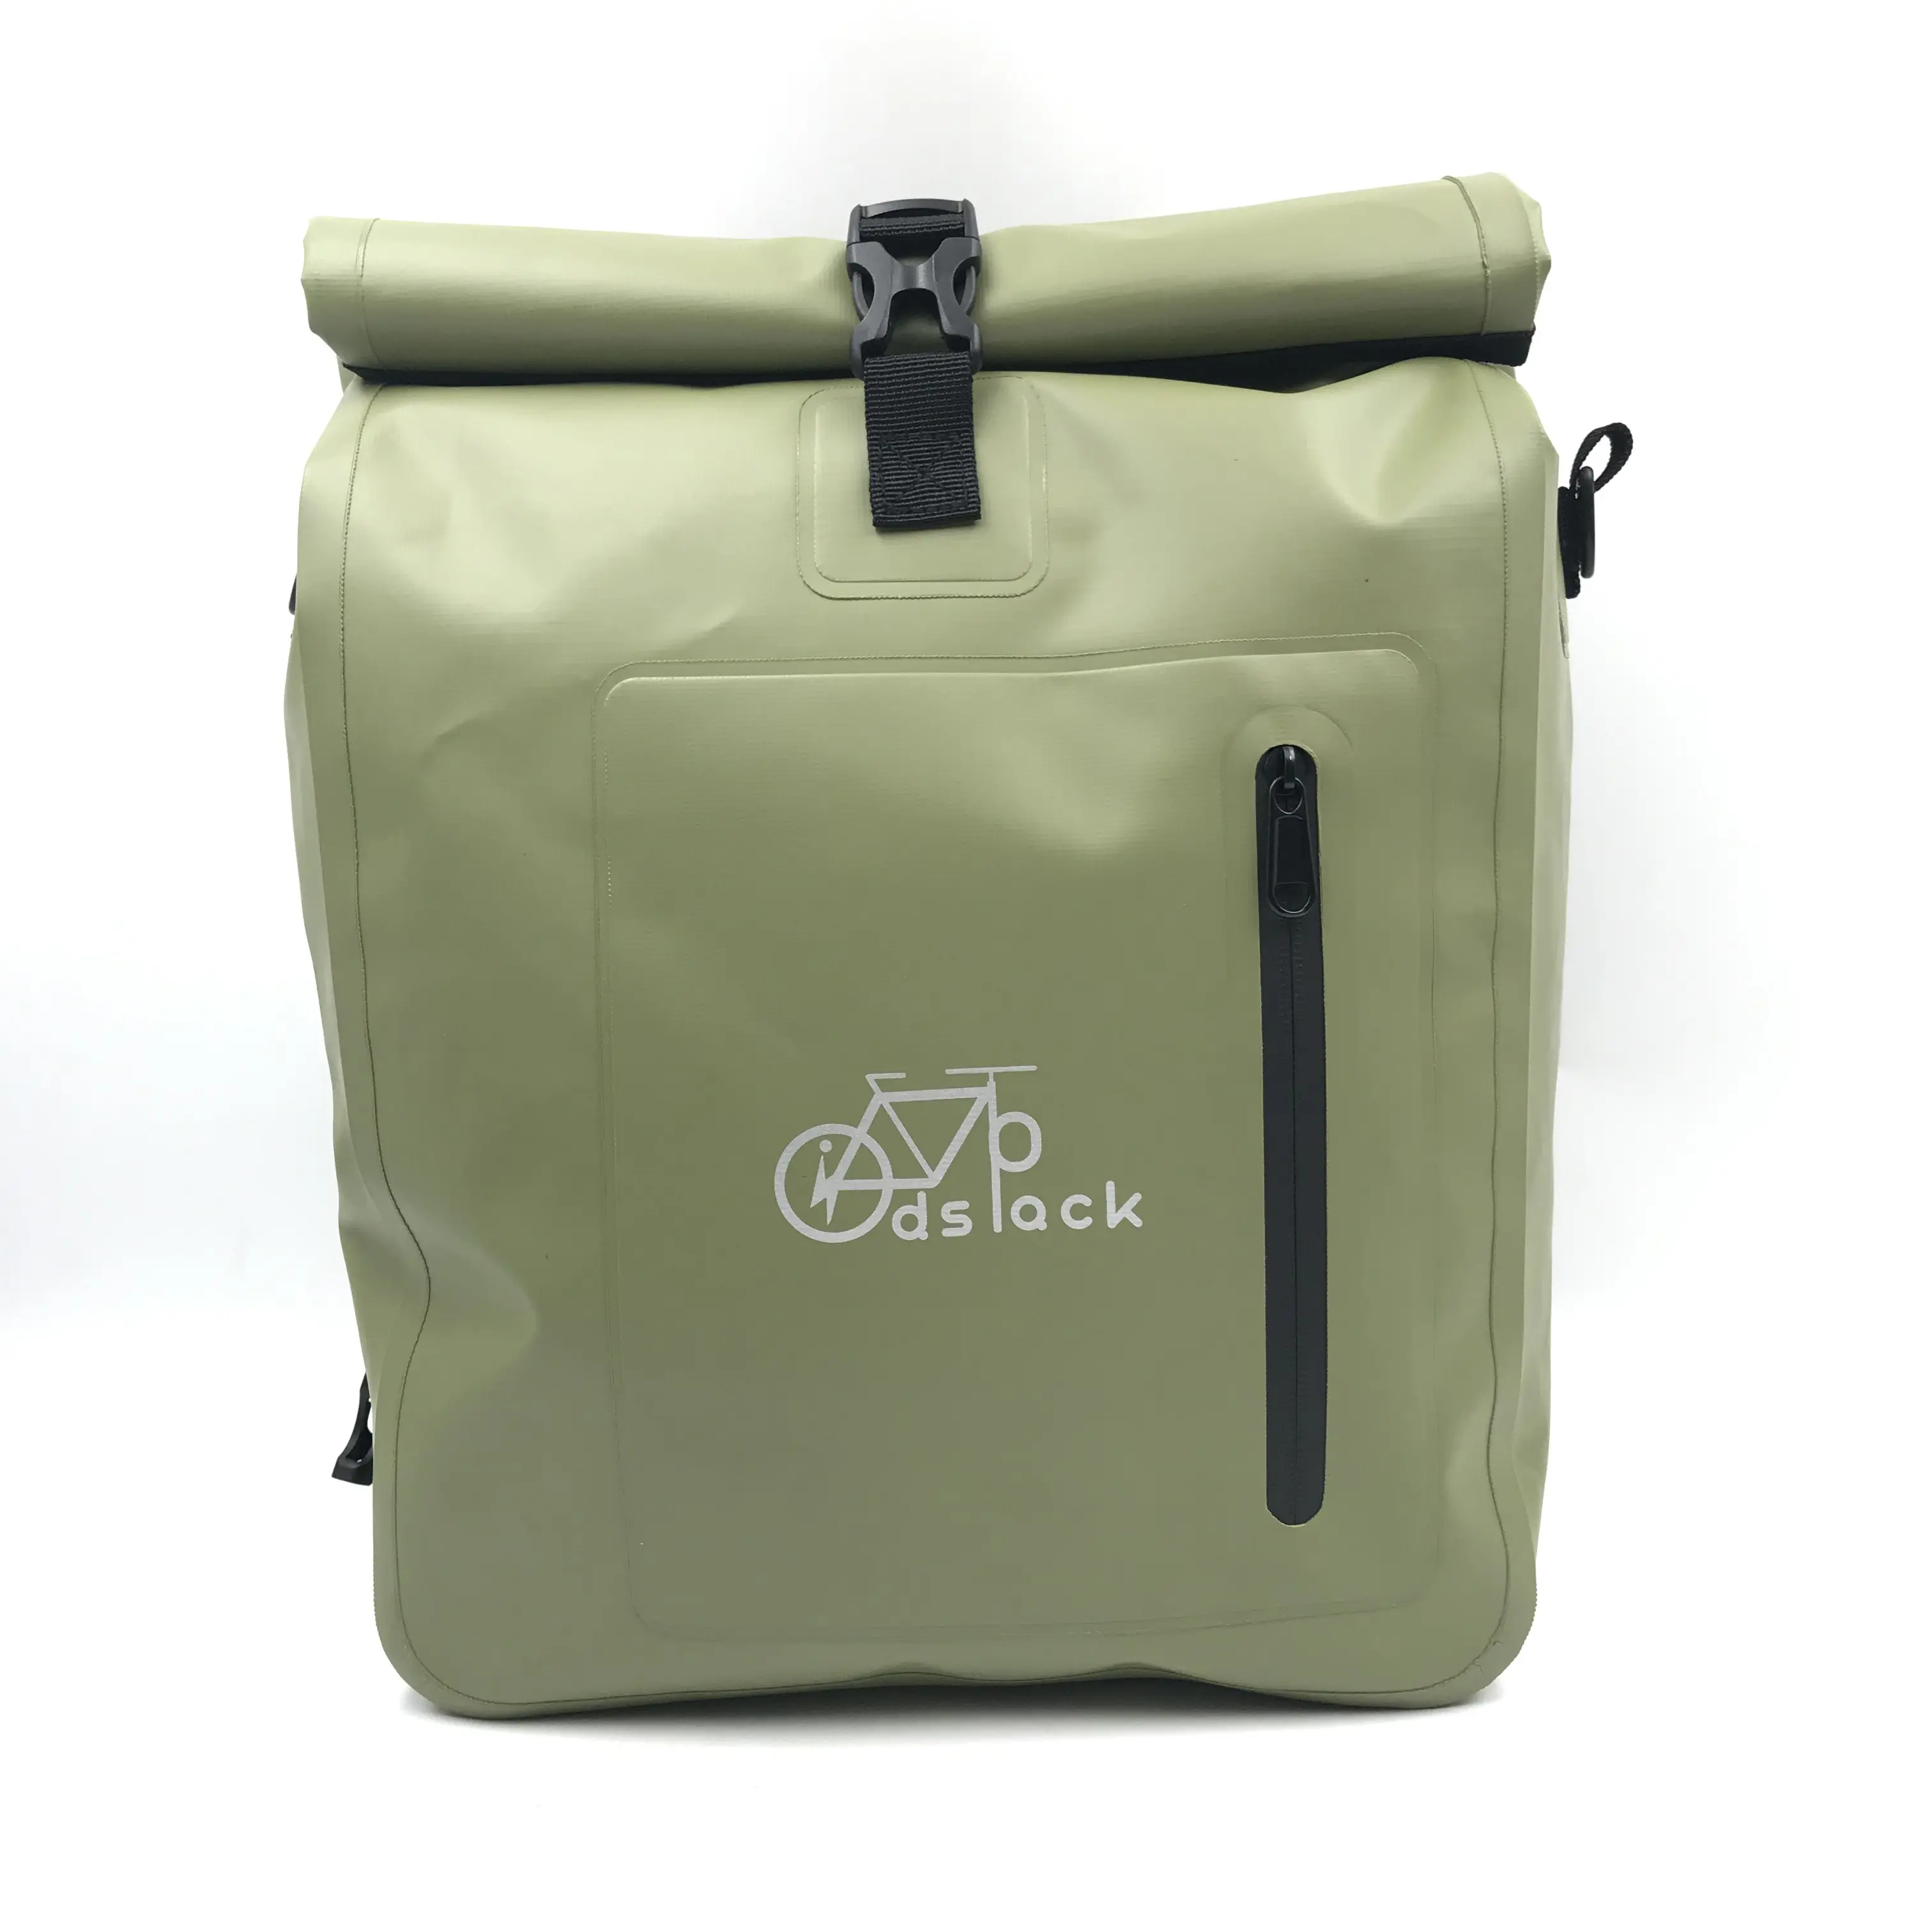 3 in 1 Bicycle Bag for Pannier Rack with Backpack, Waterproof, 27 L, Pannier Rack Bag, Reflective, Saddle Bag for Bicycle